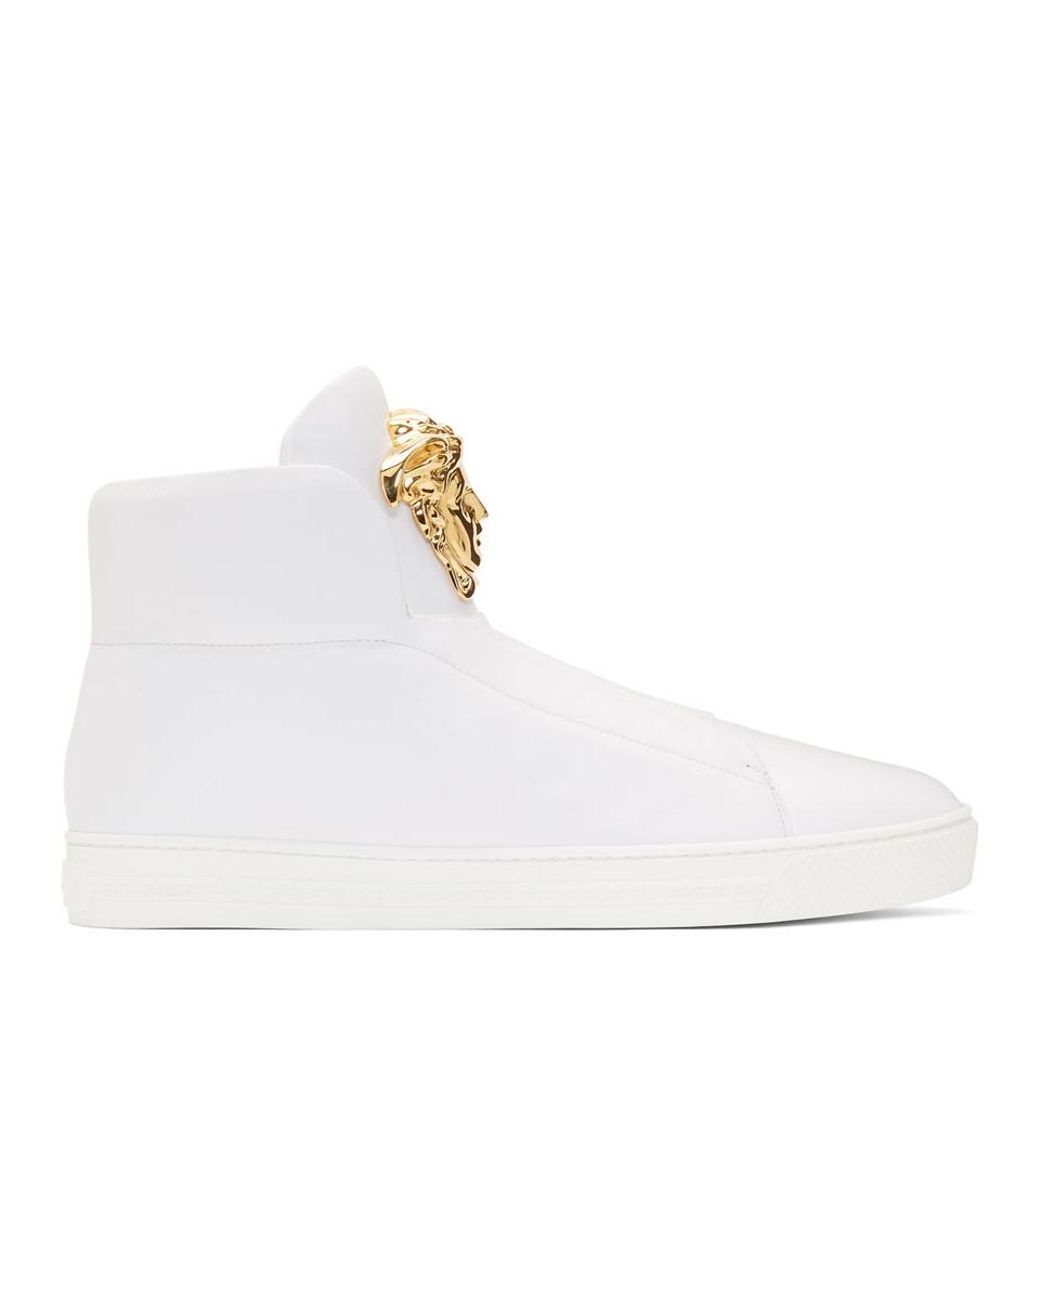 Versace White Palazzo Slip-on Sneakers for Men | Lyst